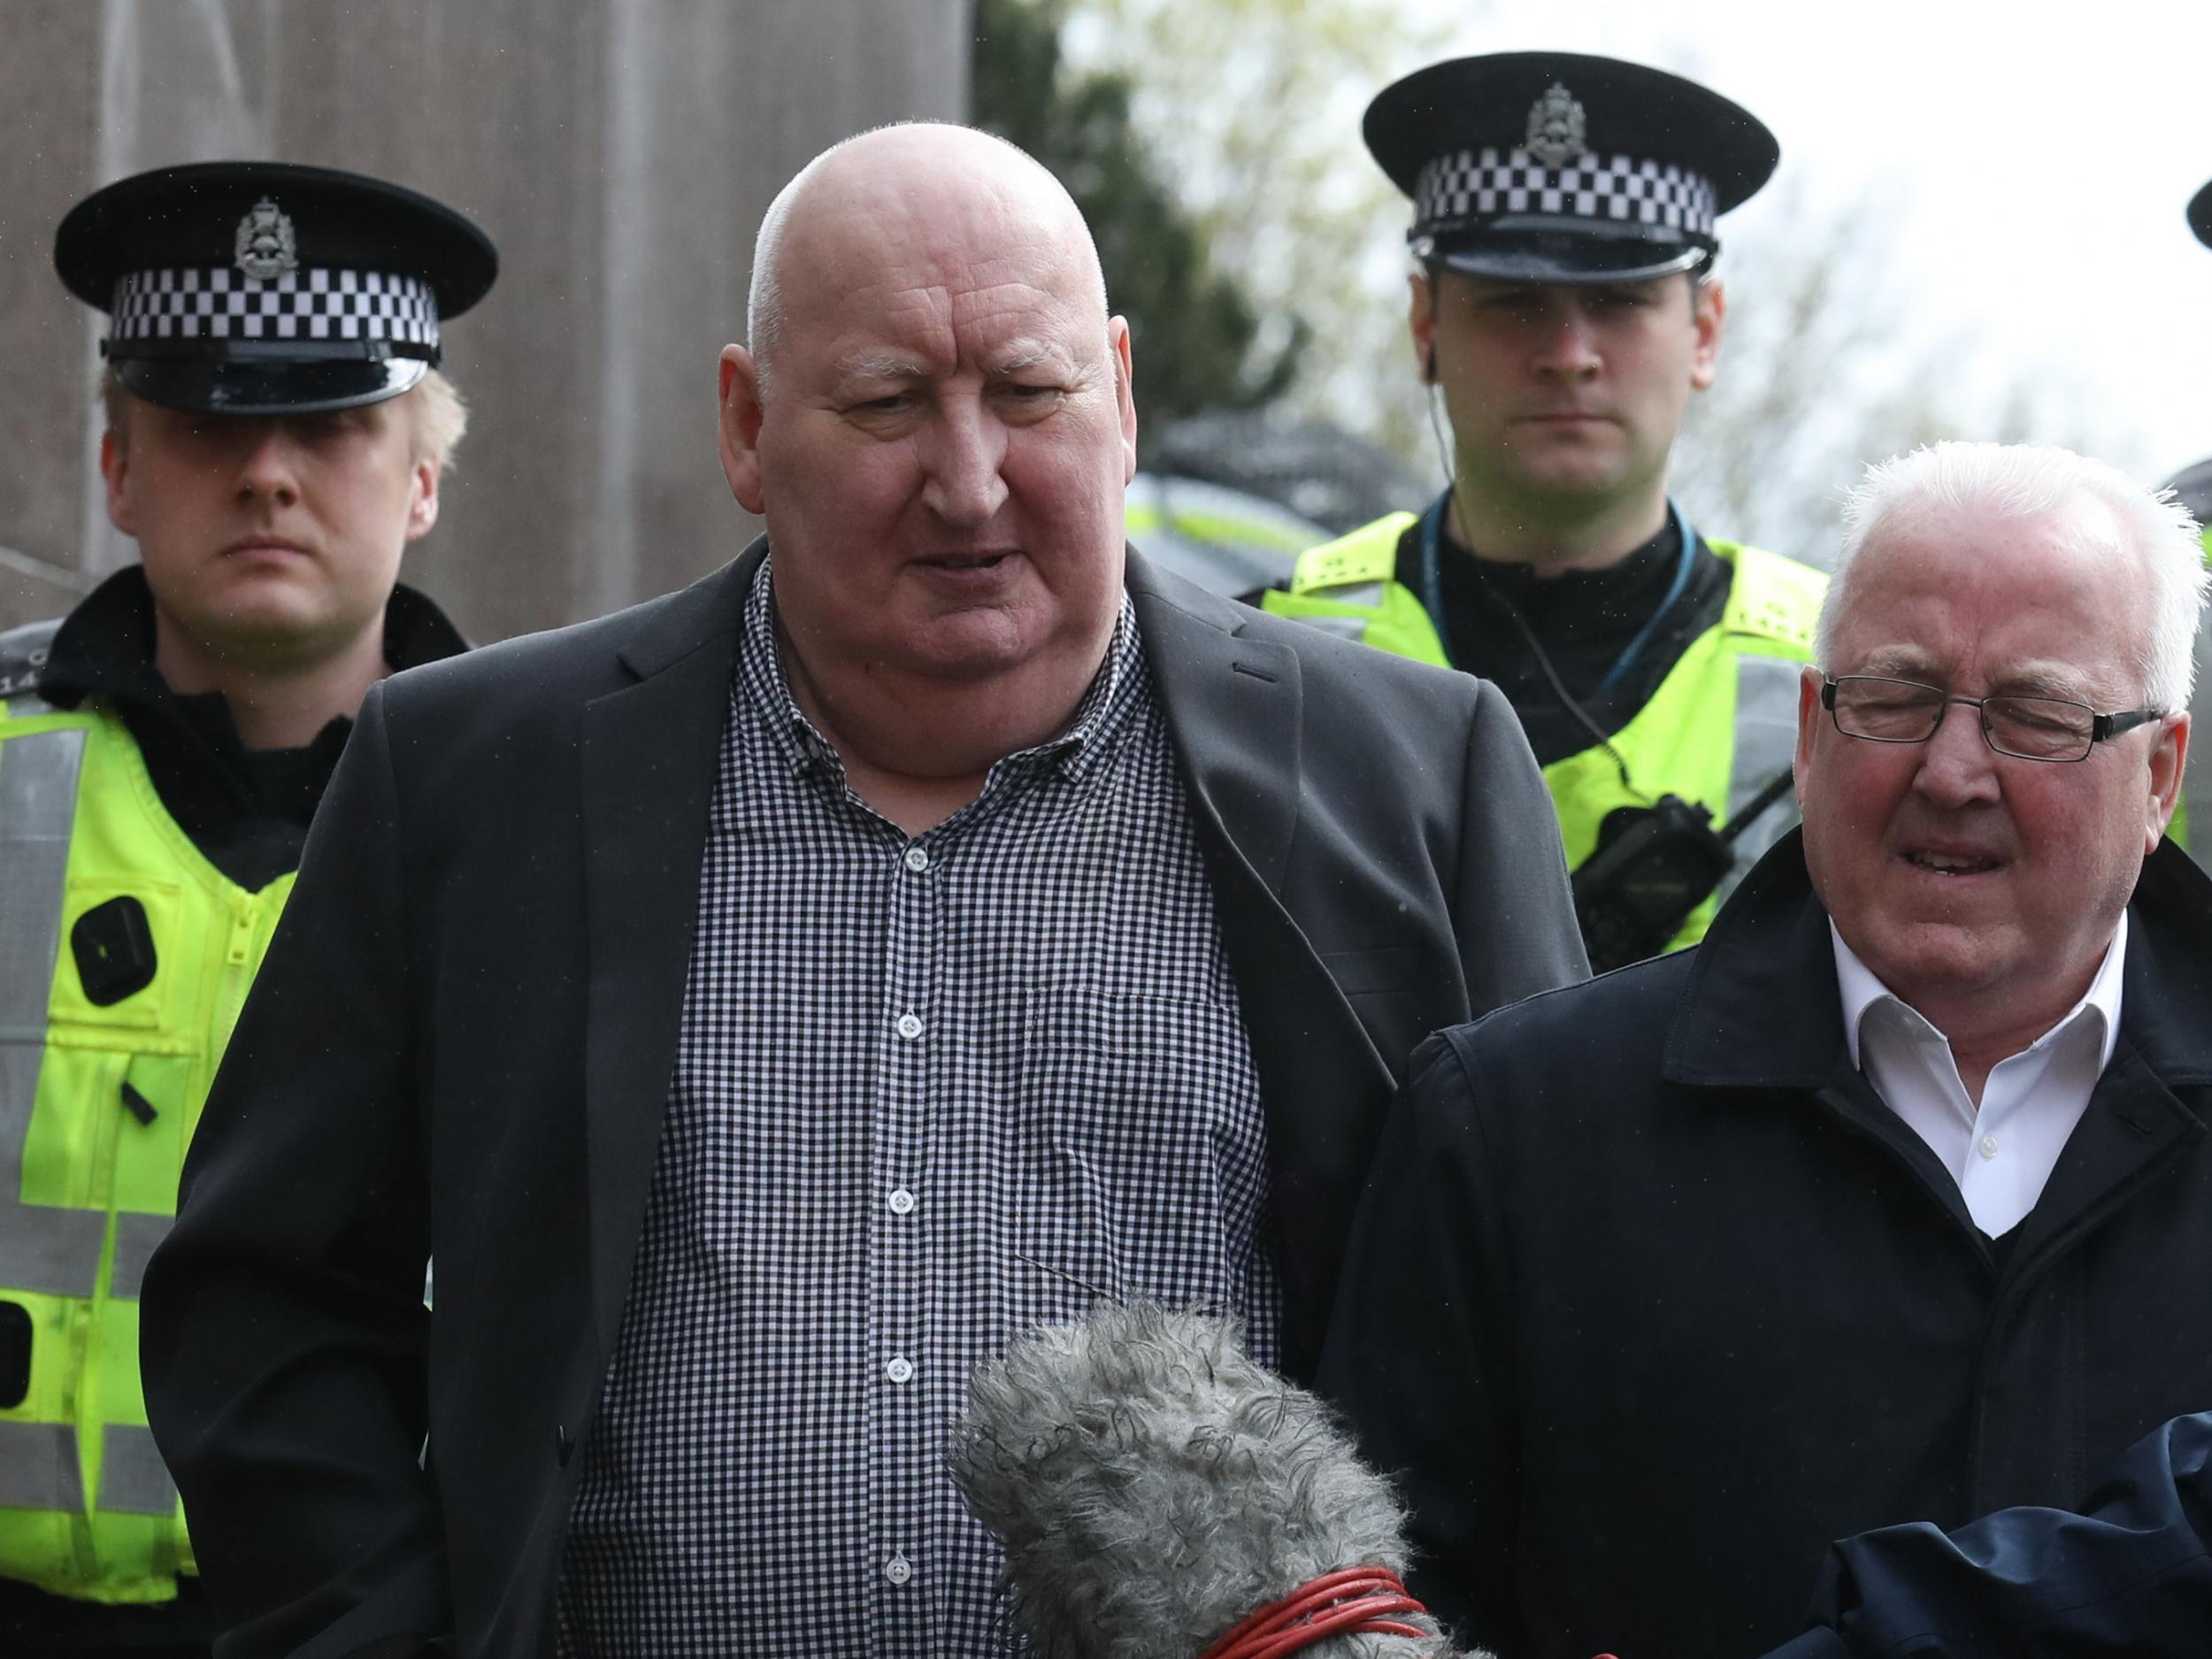 Harry Clarke was branded ‘irresponsible and reprehensible’ by the sentencing Sheriff